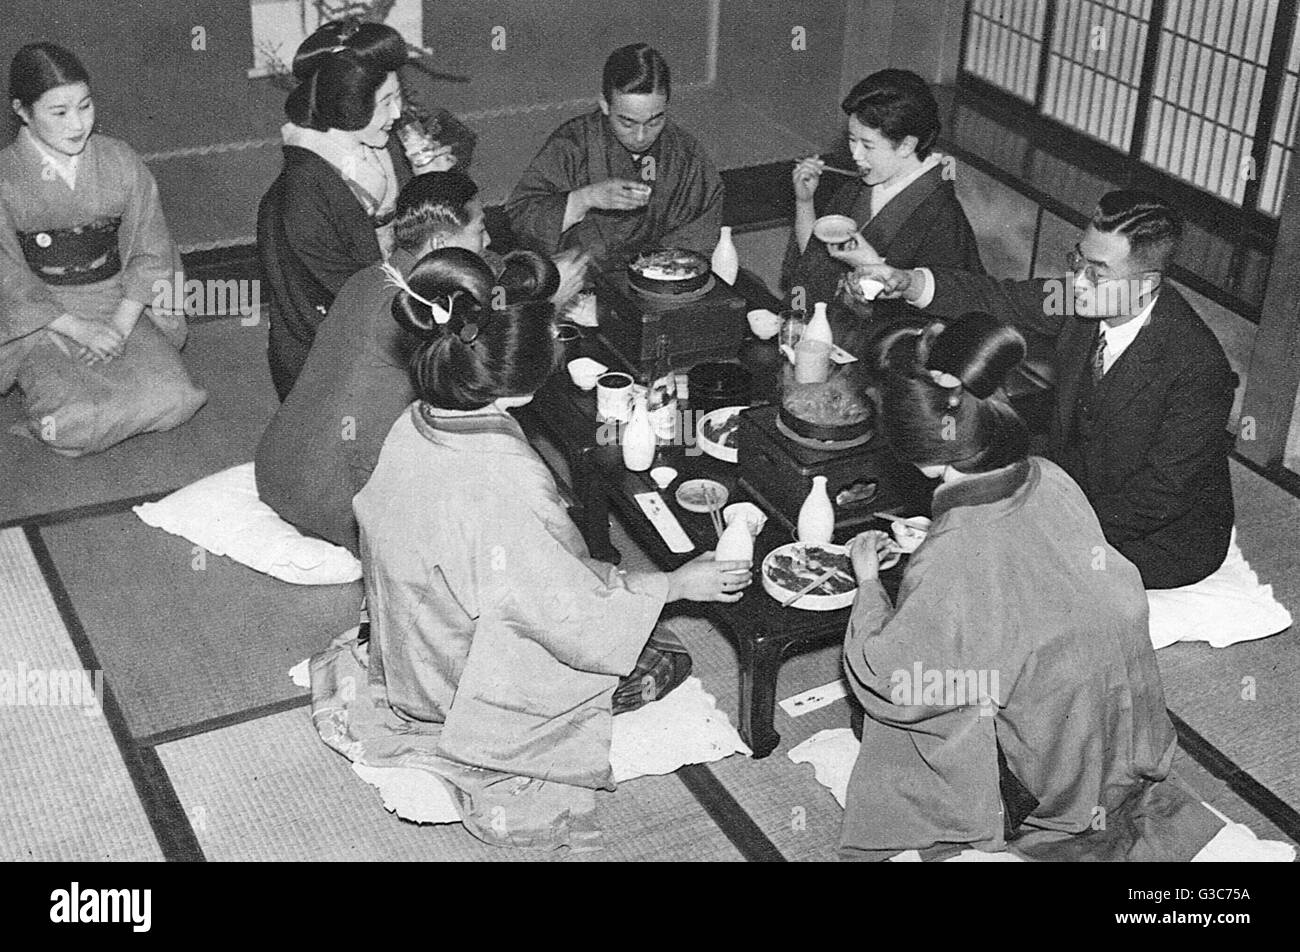 A group of Japanese people eating a meal. Stock Photo